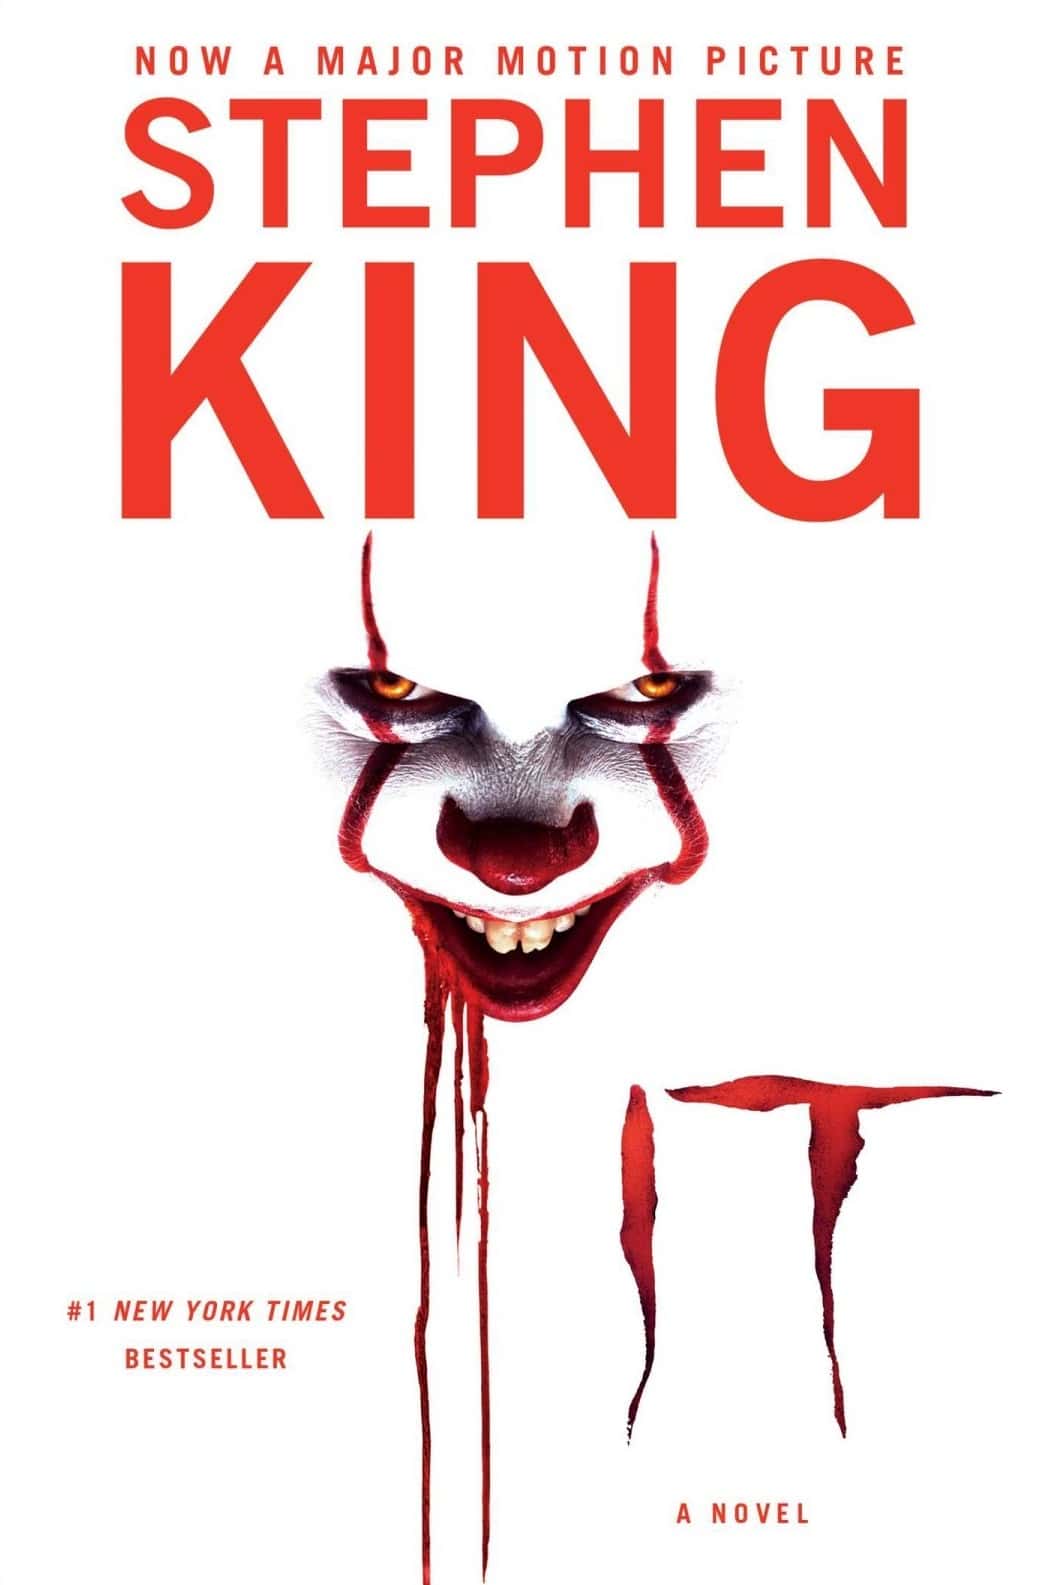 <ul> <li><strong>Runtime:</strong> 44 hours, 55 minutes</li>    <li><strong>Author:</strong> Stephen King</li>    <li><strong>Narrator:</strong> Steven Weber</li> </ul>    <p>It doesn't matter if you've seen the miniseries, watched the films, or <a href="https://history-computer.com/reddits-best-fantasy-books/?utm_campaign=msn&utm_source=msn_slideshow&utm_content=534327&utm_medium=in_content">read the book</a> before. Stephen King's <em>It</em> takes on a whole new depth when heard in audiobook form. The <a href="https://history-computer.com/reddits-best-horror-movies/?utm_campaign=msn&utm_source=msn_slideshow&utm_content=534327&utm_medium=in_content" rel="noopener">horror</a> epic delves into the fears and traumas of a group of childhood friends as they face off against a killer clown who plagues their town every 27 years. Fans admire King's masterful storytelling, the rich character development, and the spine-tingling suspense. It's an even more terrifying and unforgettable experience as an audiobook.</p>